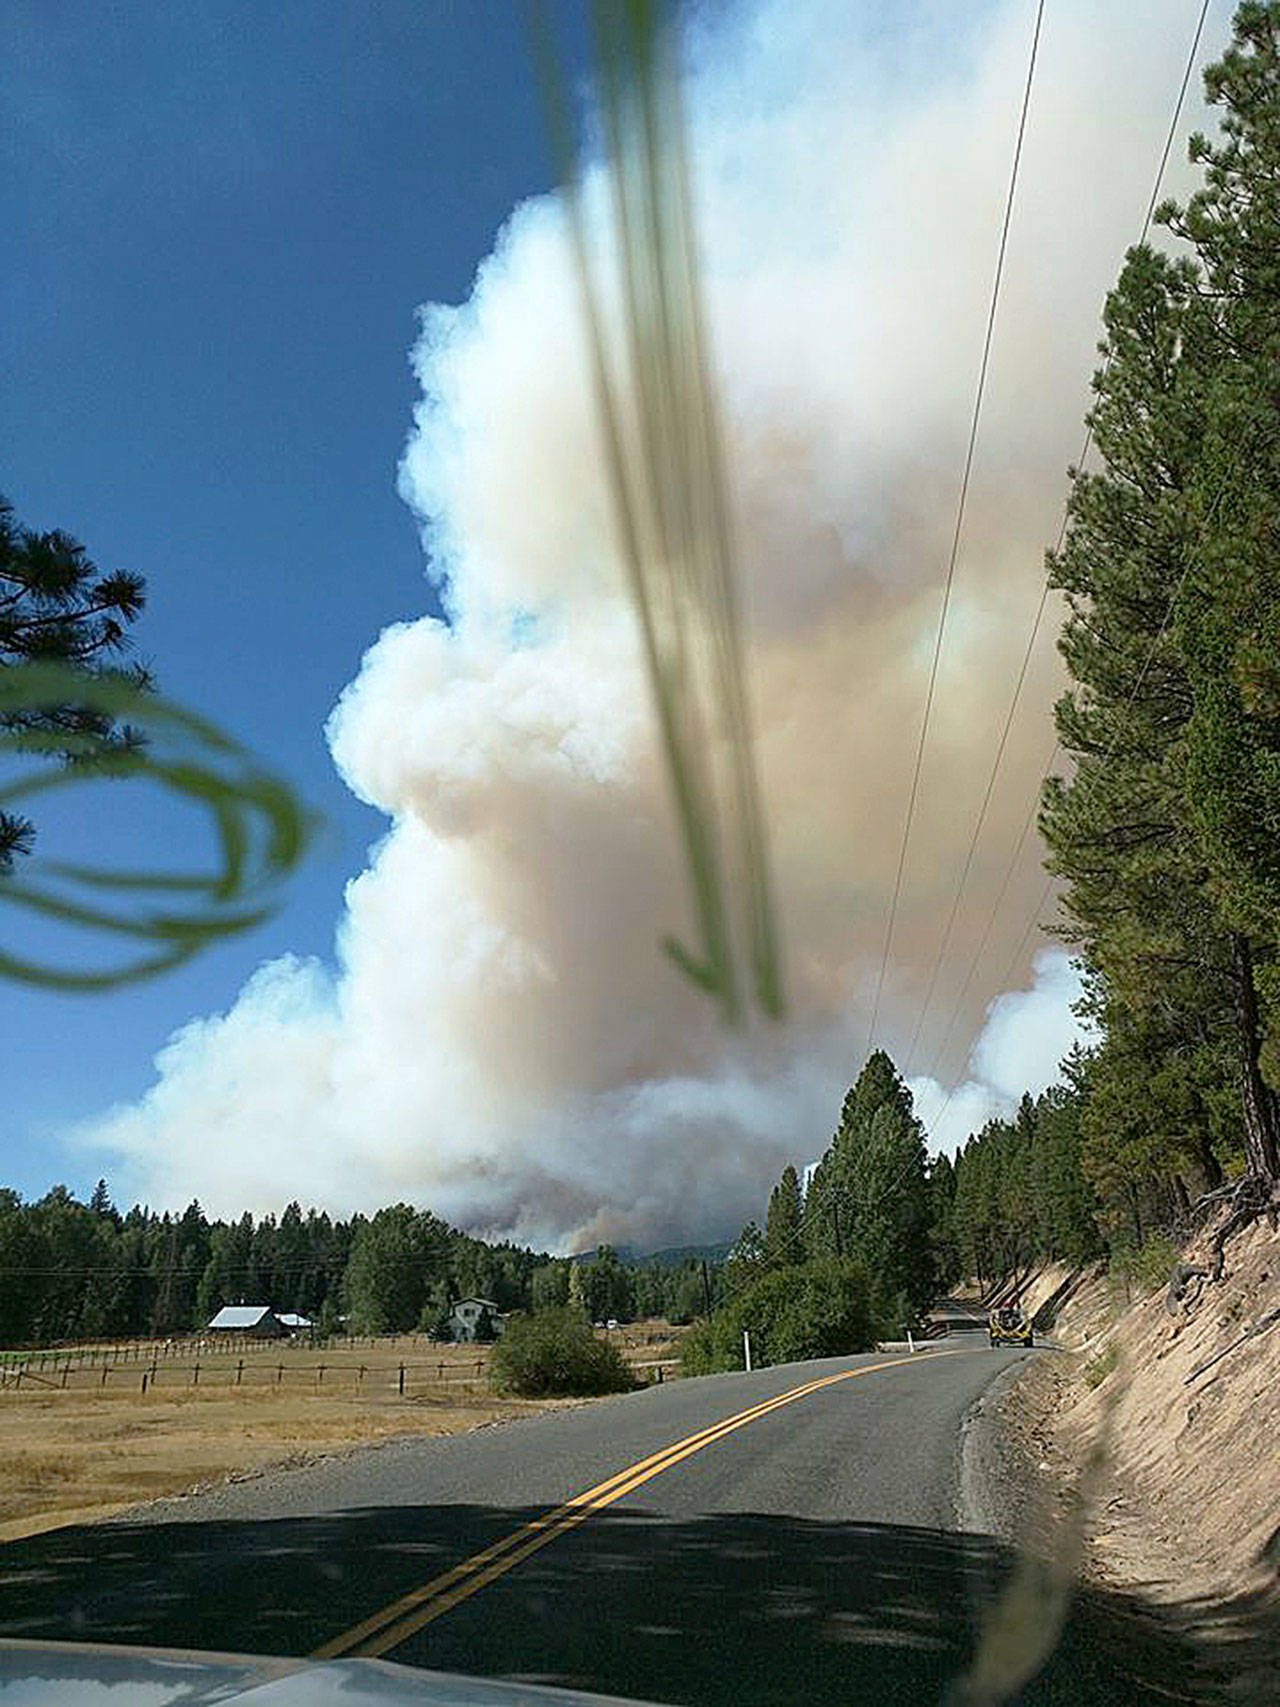 The Jolly Mountain Fire near Cle Elum, as photographed from a firetruck on Saturday, has been contributing significantly to the smoke and ash in Issaquah and Sammamish. Photo courtesy of Harvey Moyer